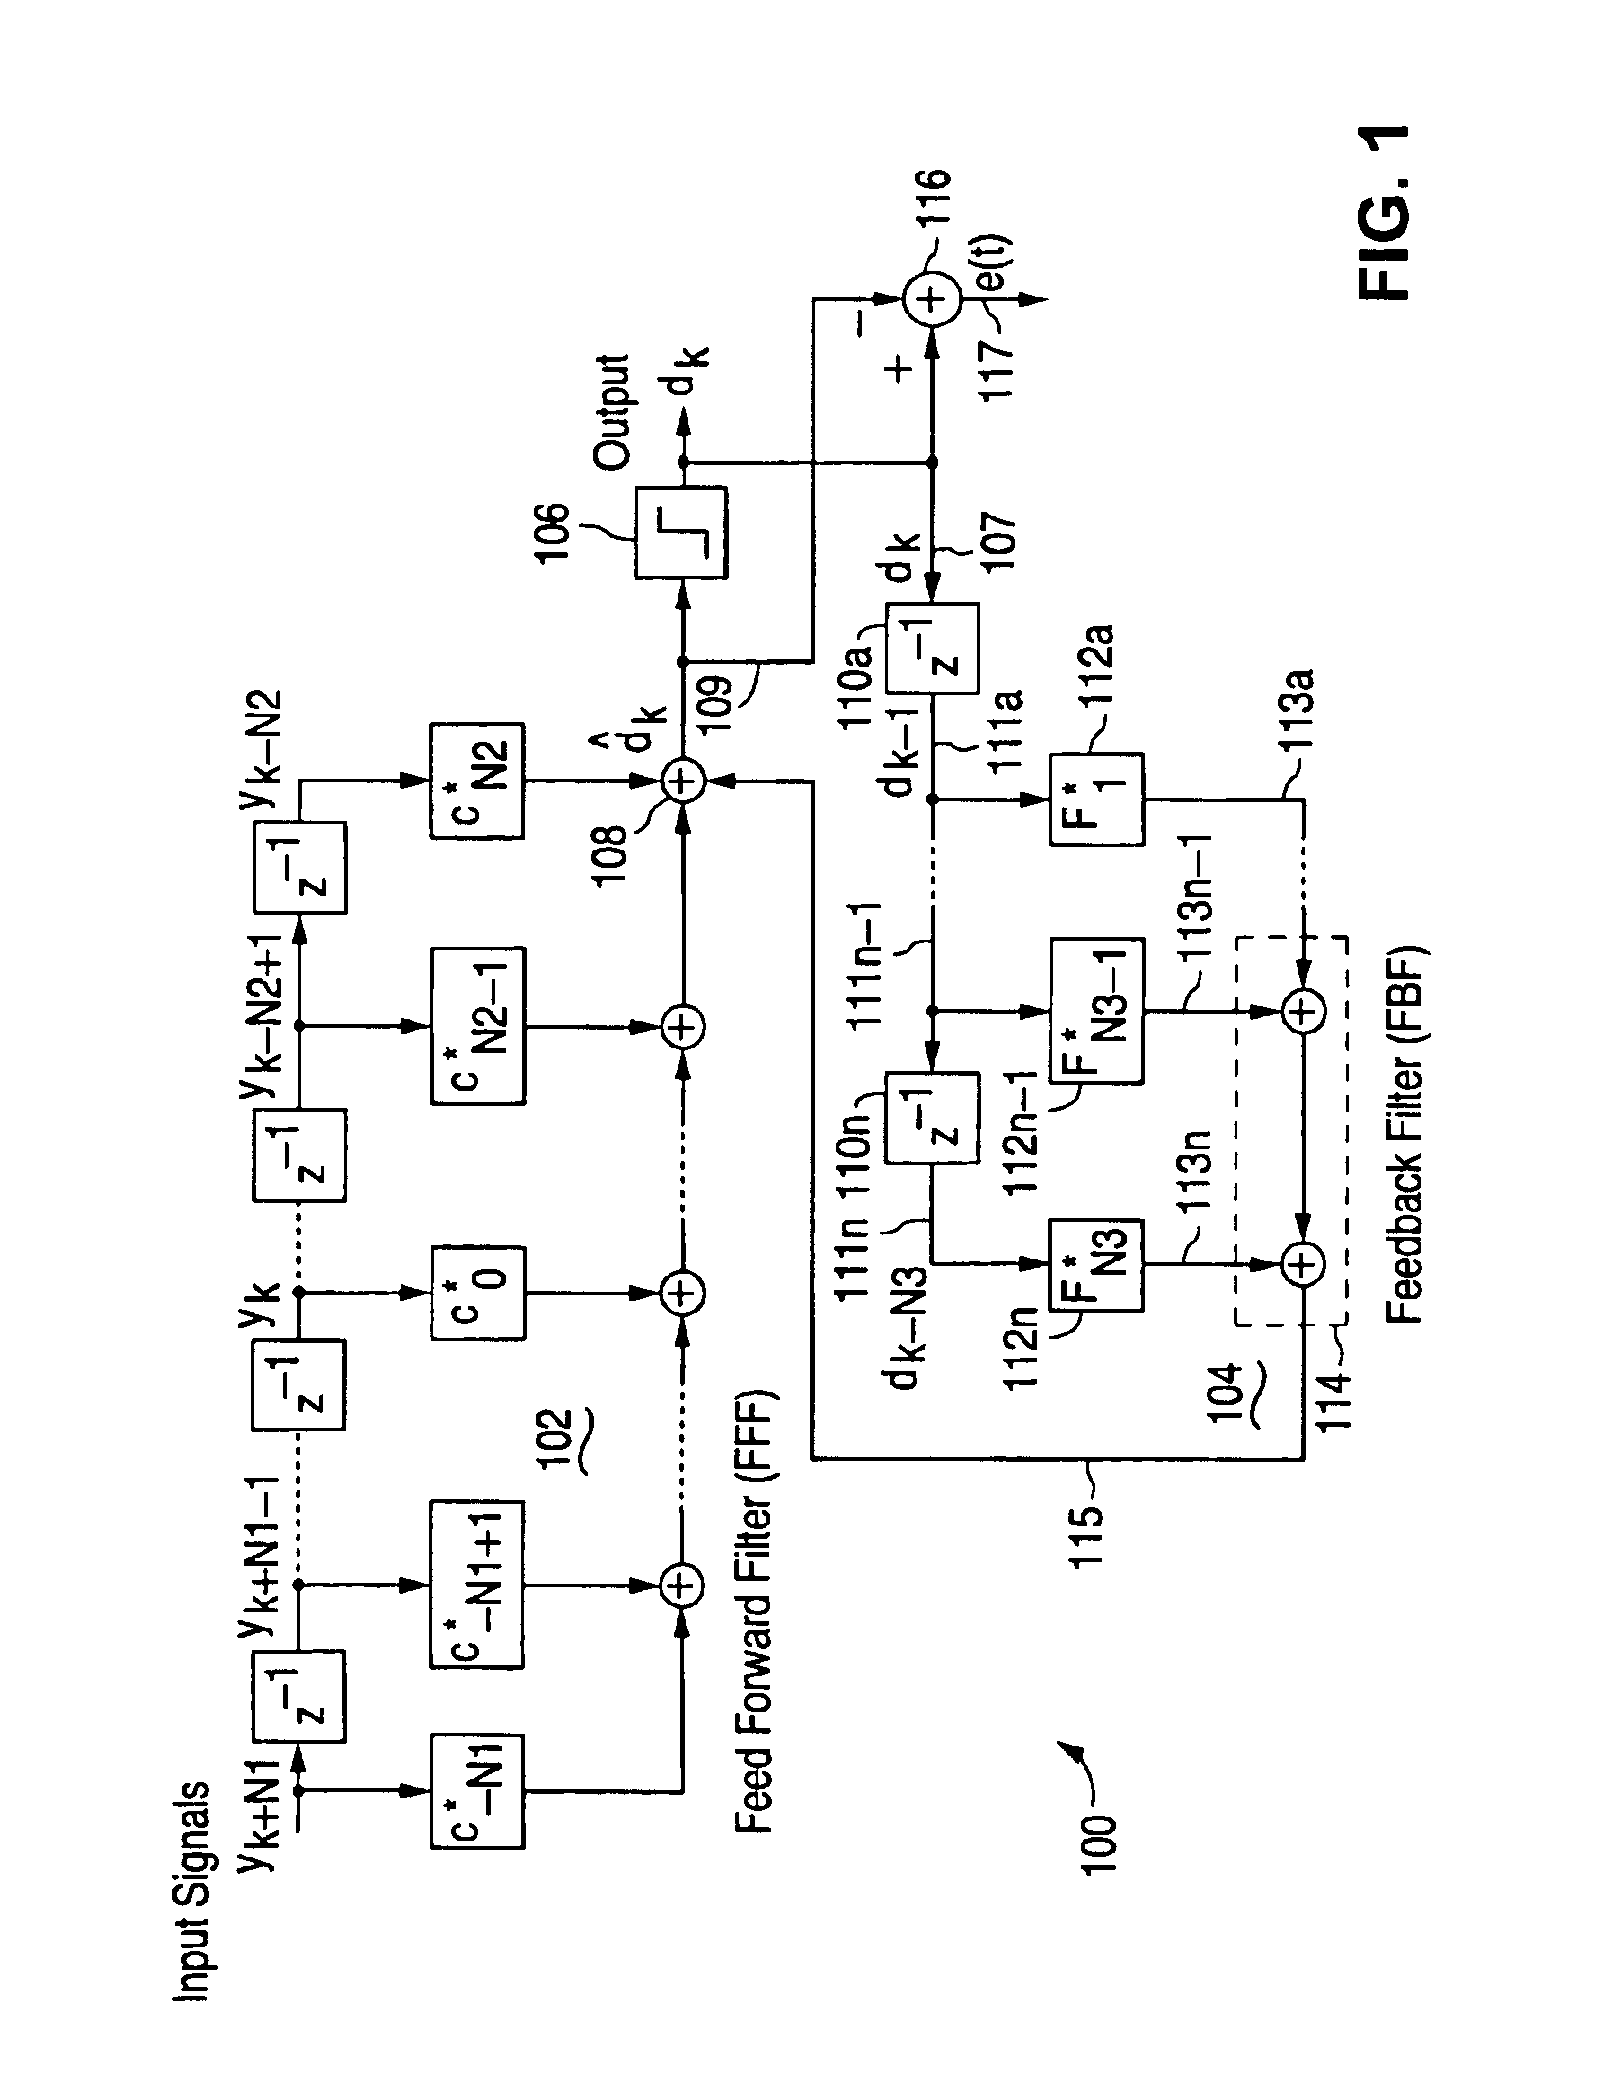 Adaptive coefficient signal generator for adaptive signal equalizers with fractionally-spaced feedback